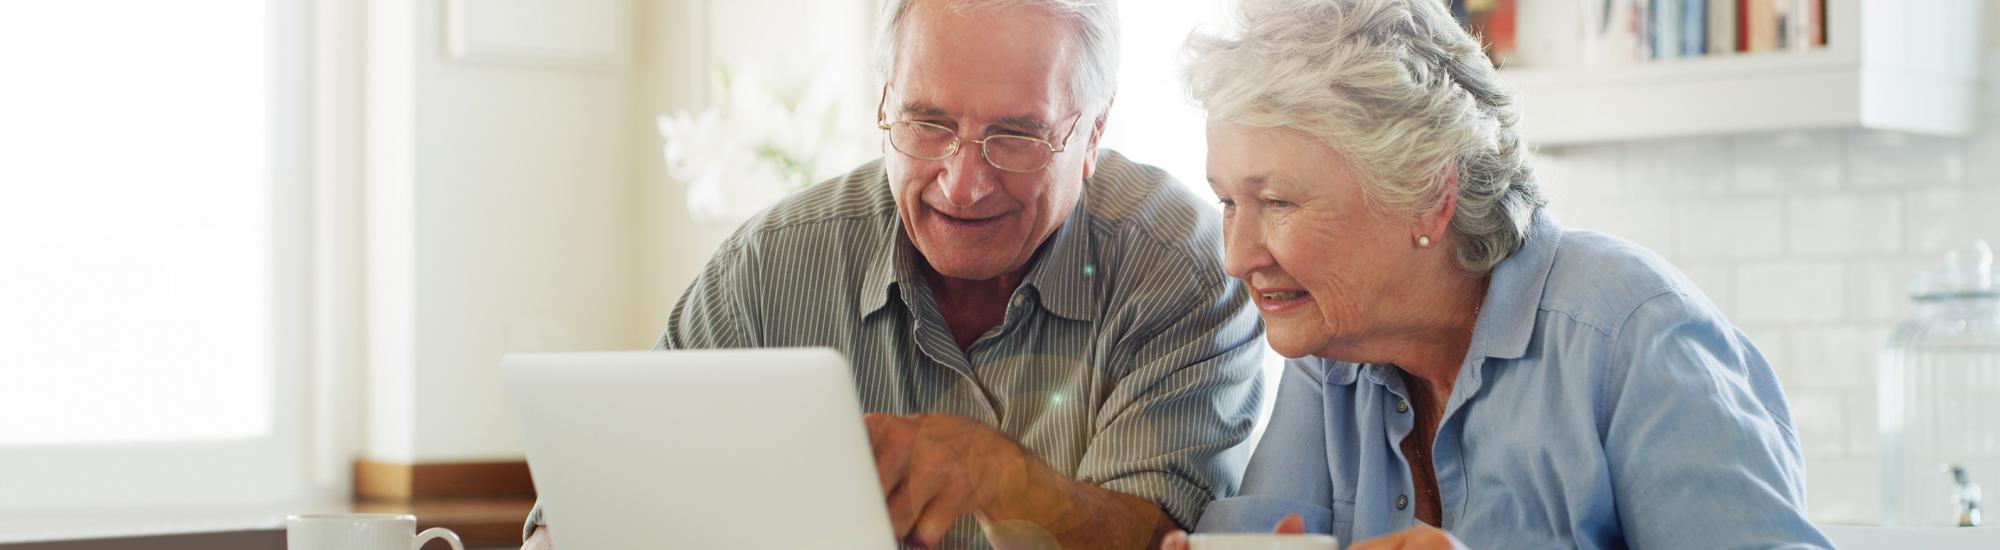 image of senior couple looking at labtop